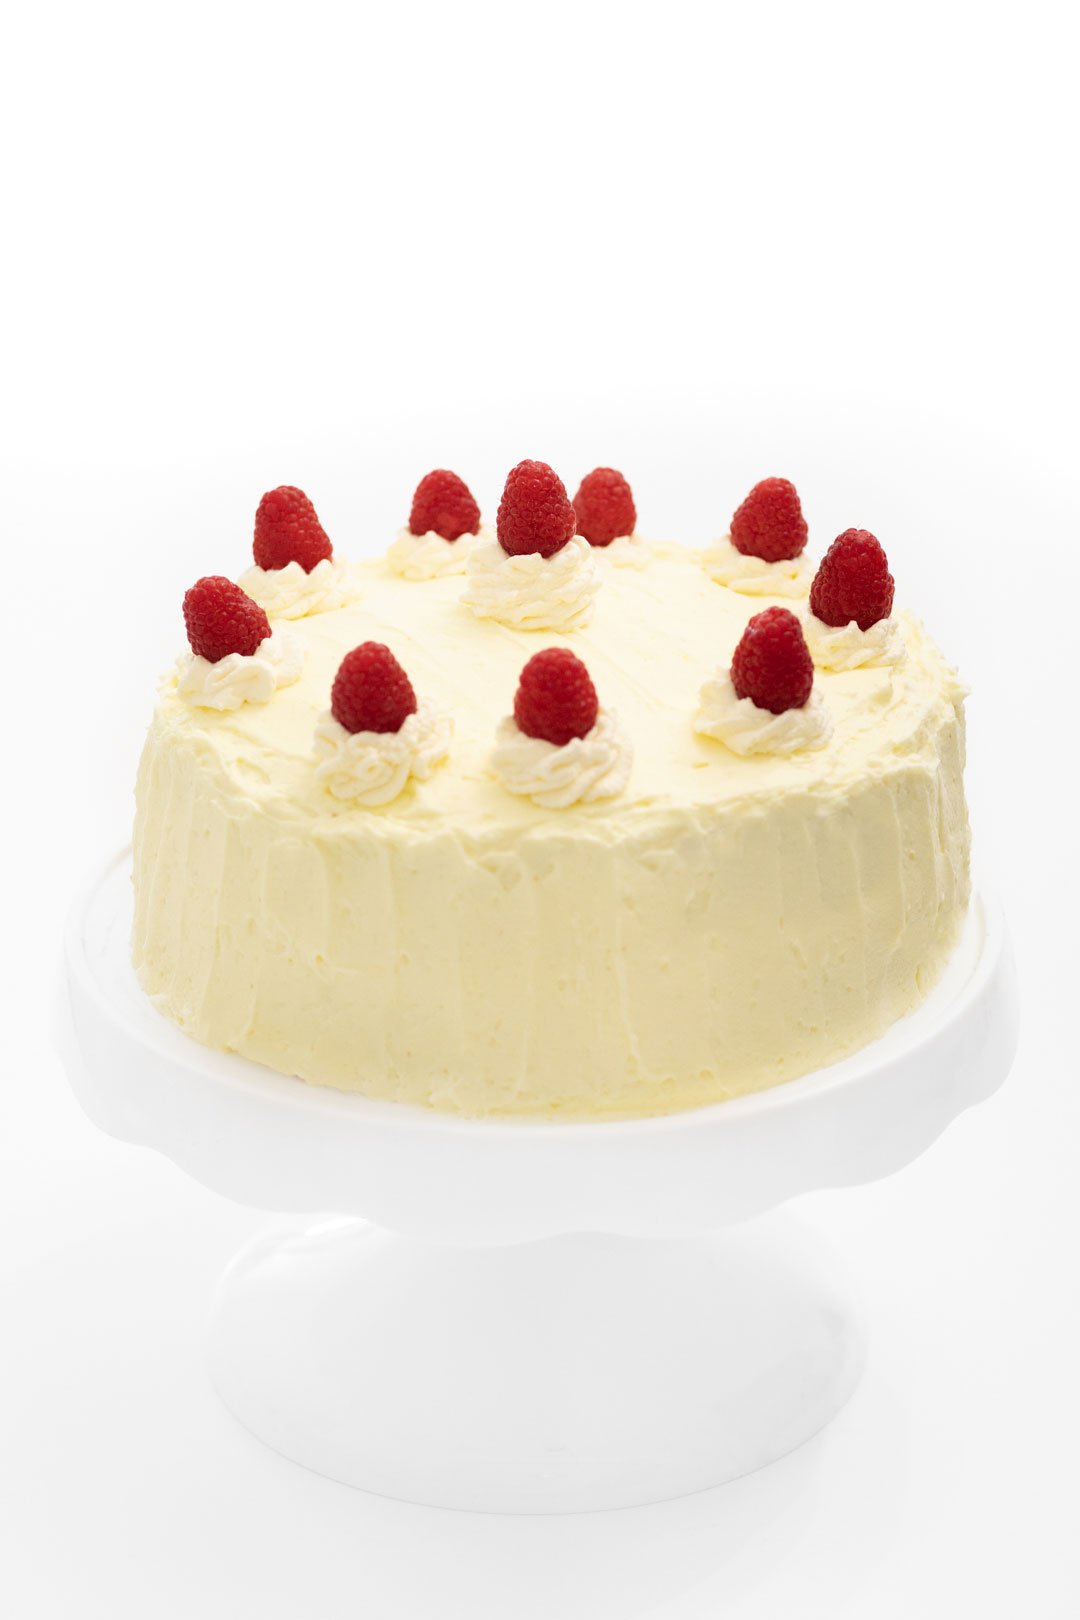 Raspberry cake with boxed mix, pudding mix and a crazy delish whipped lemon frosting. So easy. So good.